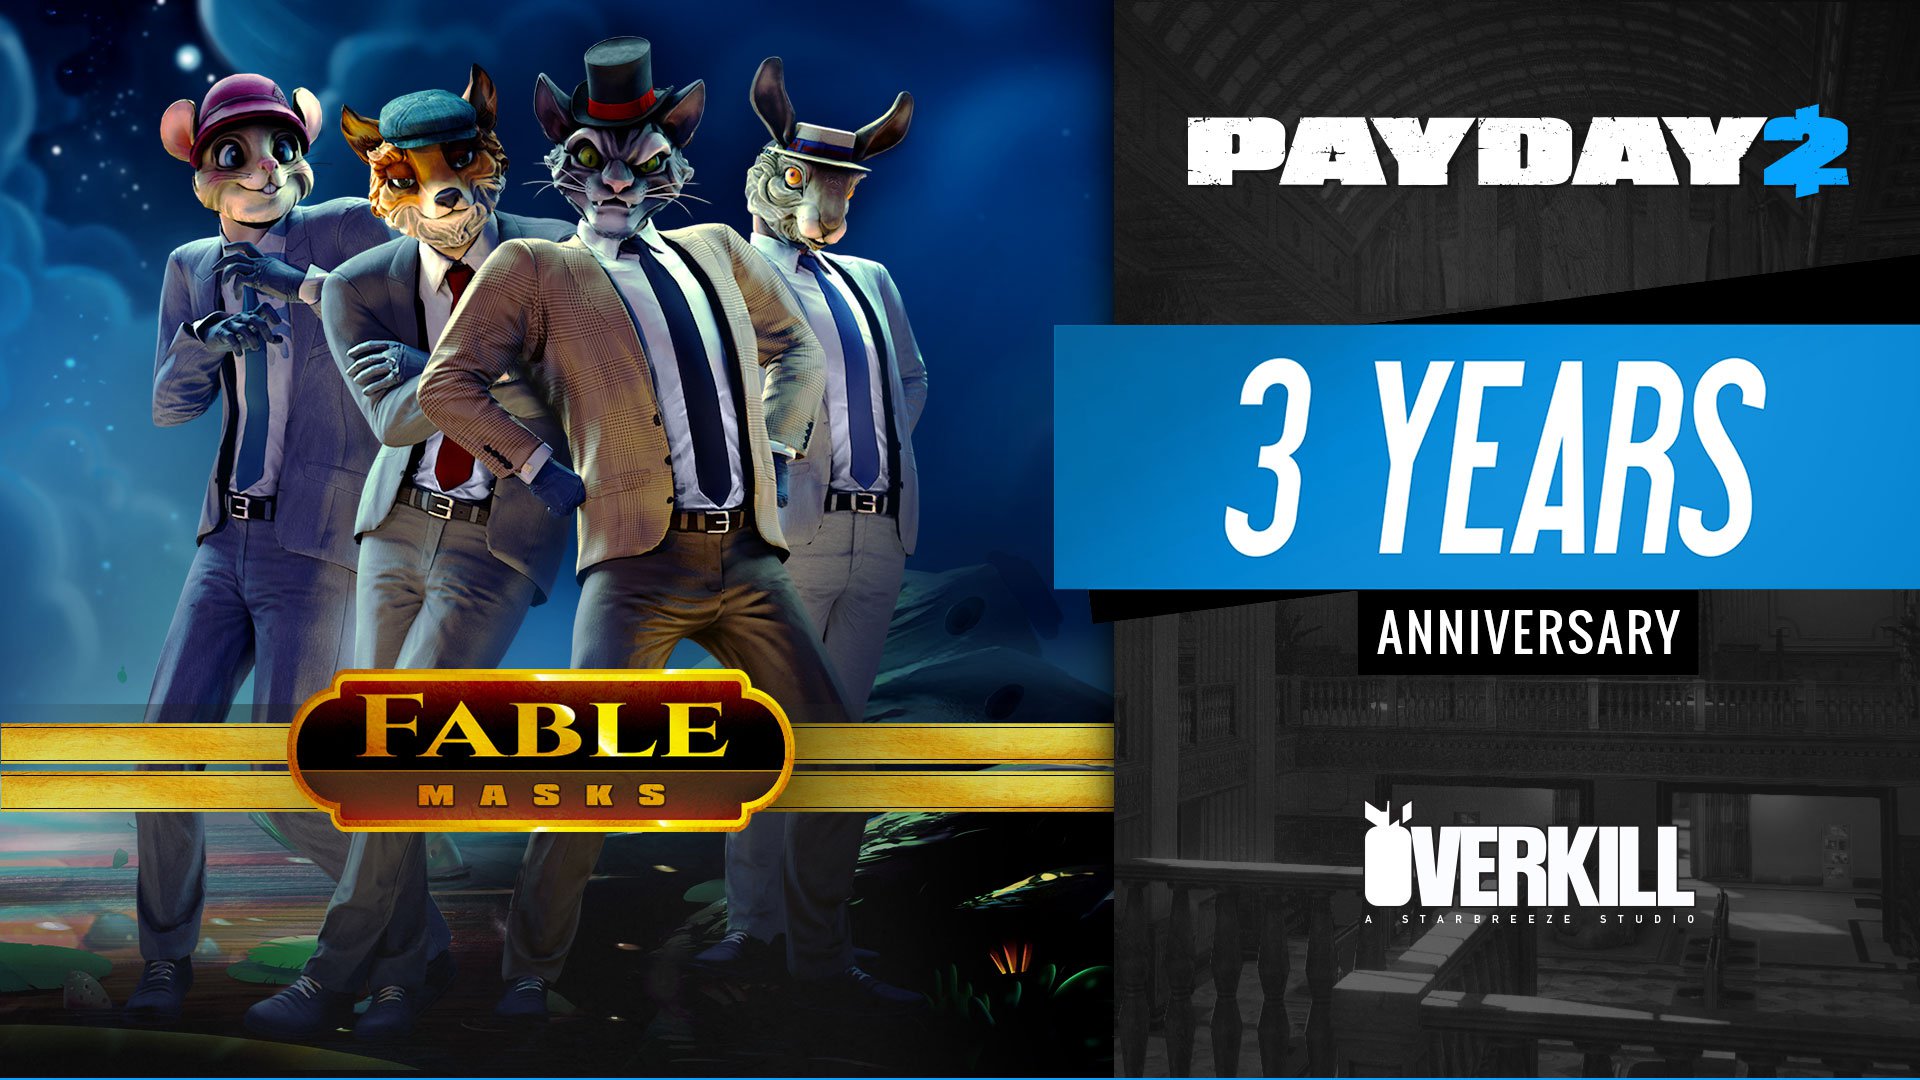 PAYDAY 2: Update 106 is live and PAYDAY 2 just turned 3 years old! - OVERKILL Software